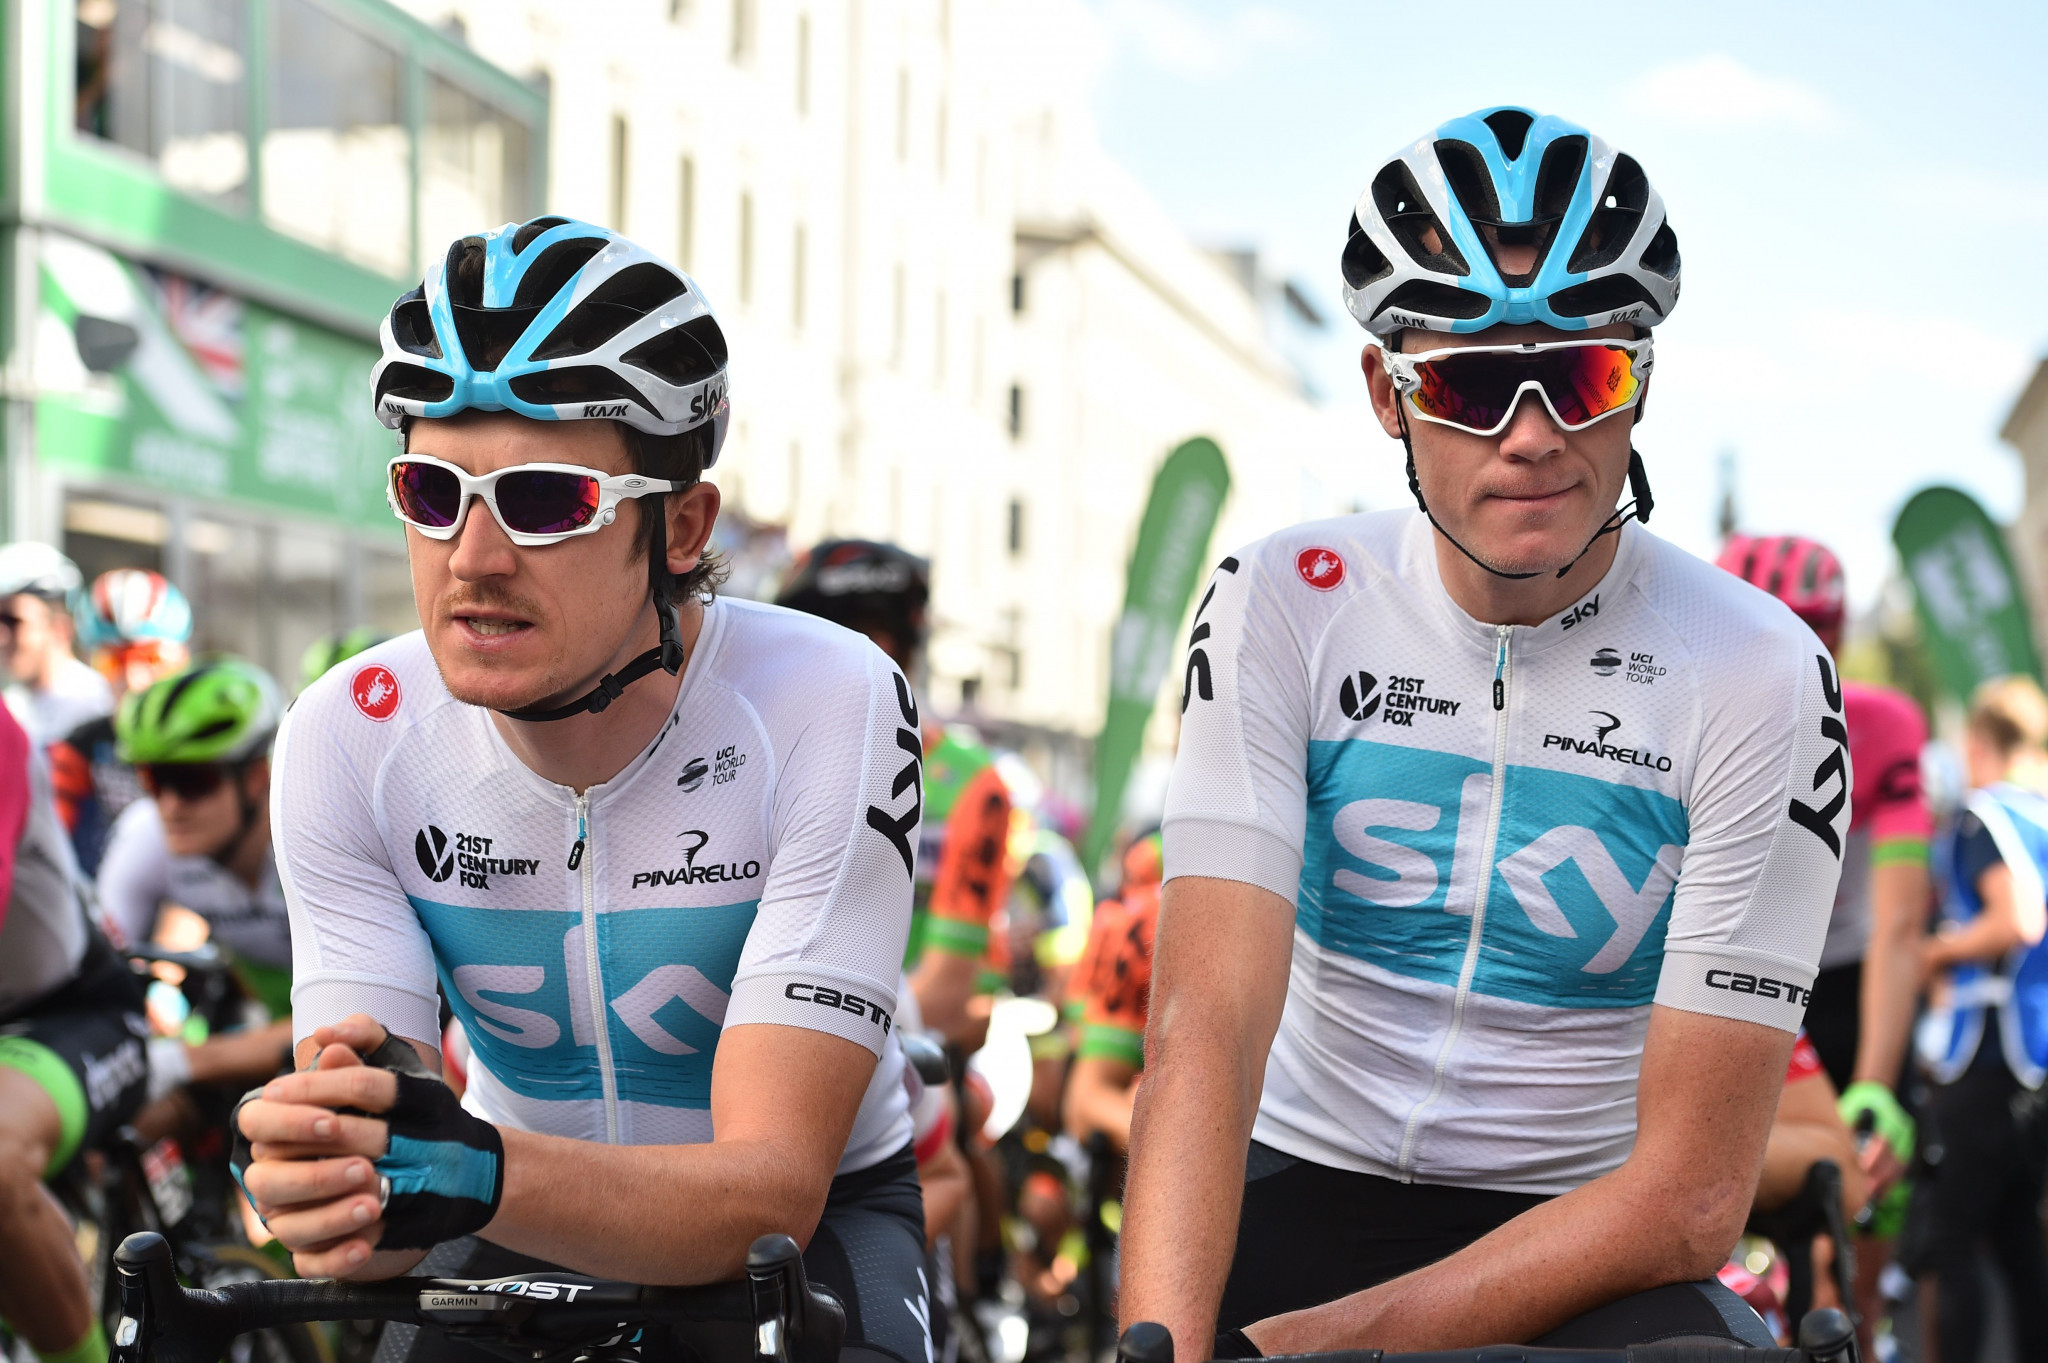 Thomas and Froome among leading riders calling for postponed CPA election over alleged statute breaches